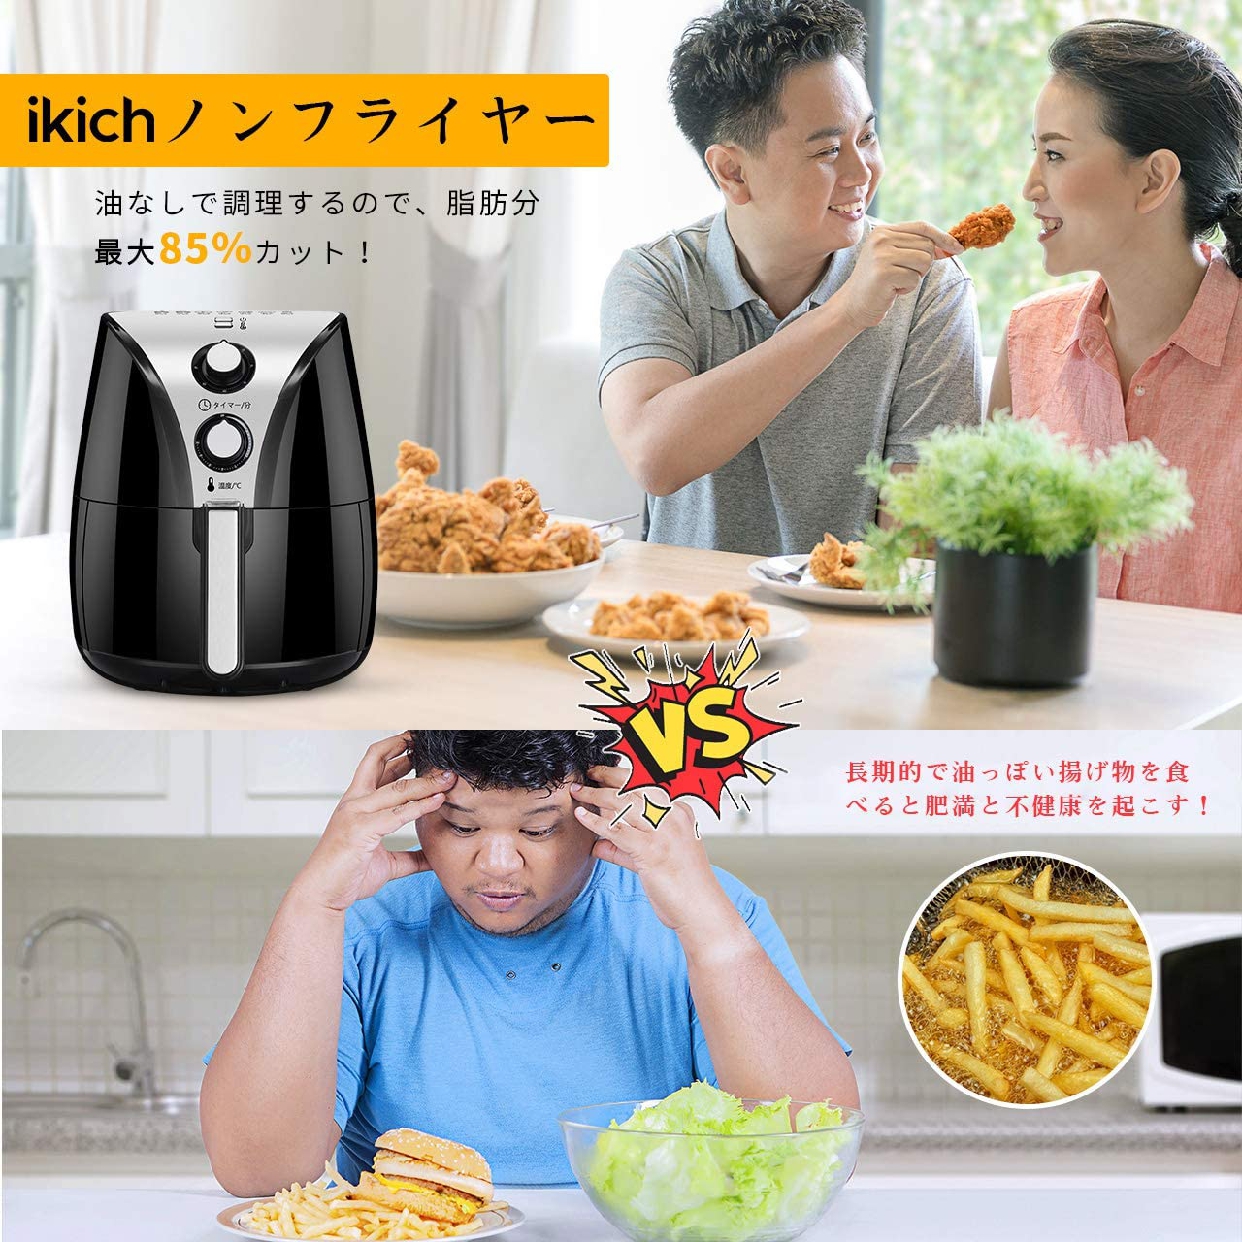 IKICH(イキック) フライヤーの商品画像サムネ7 